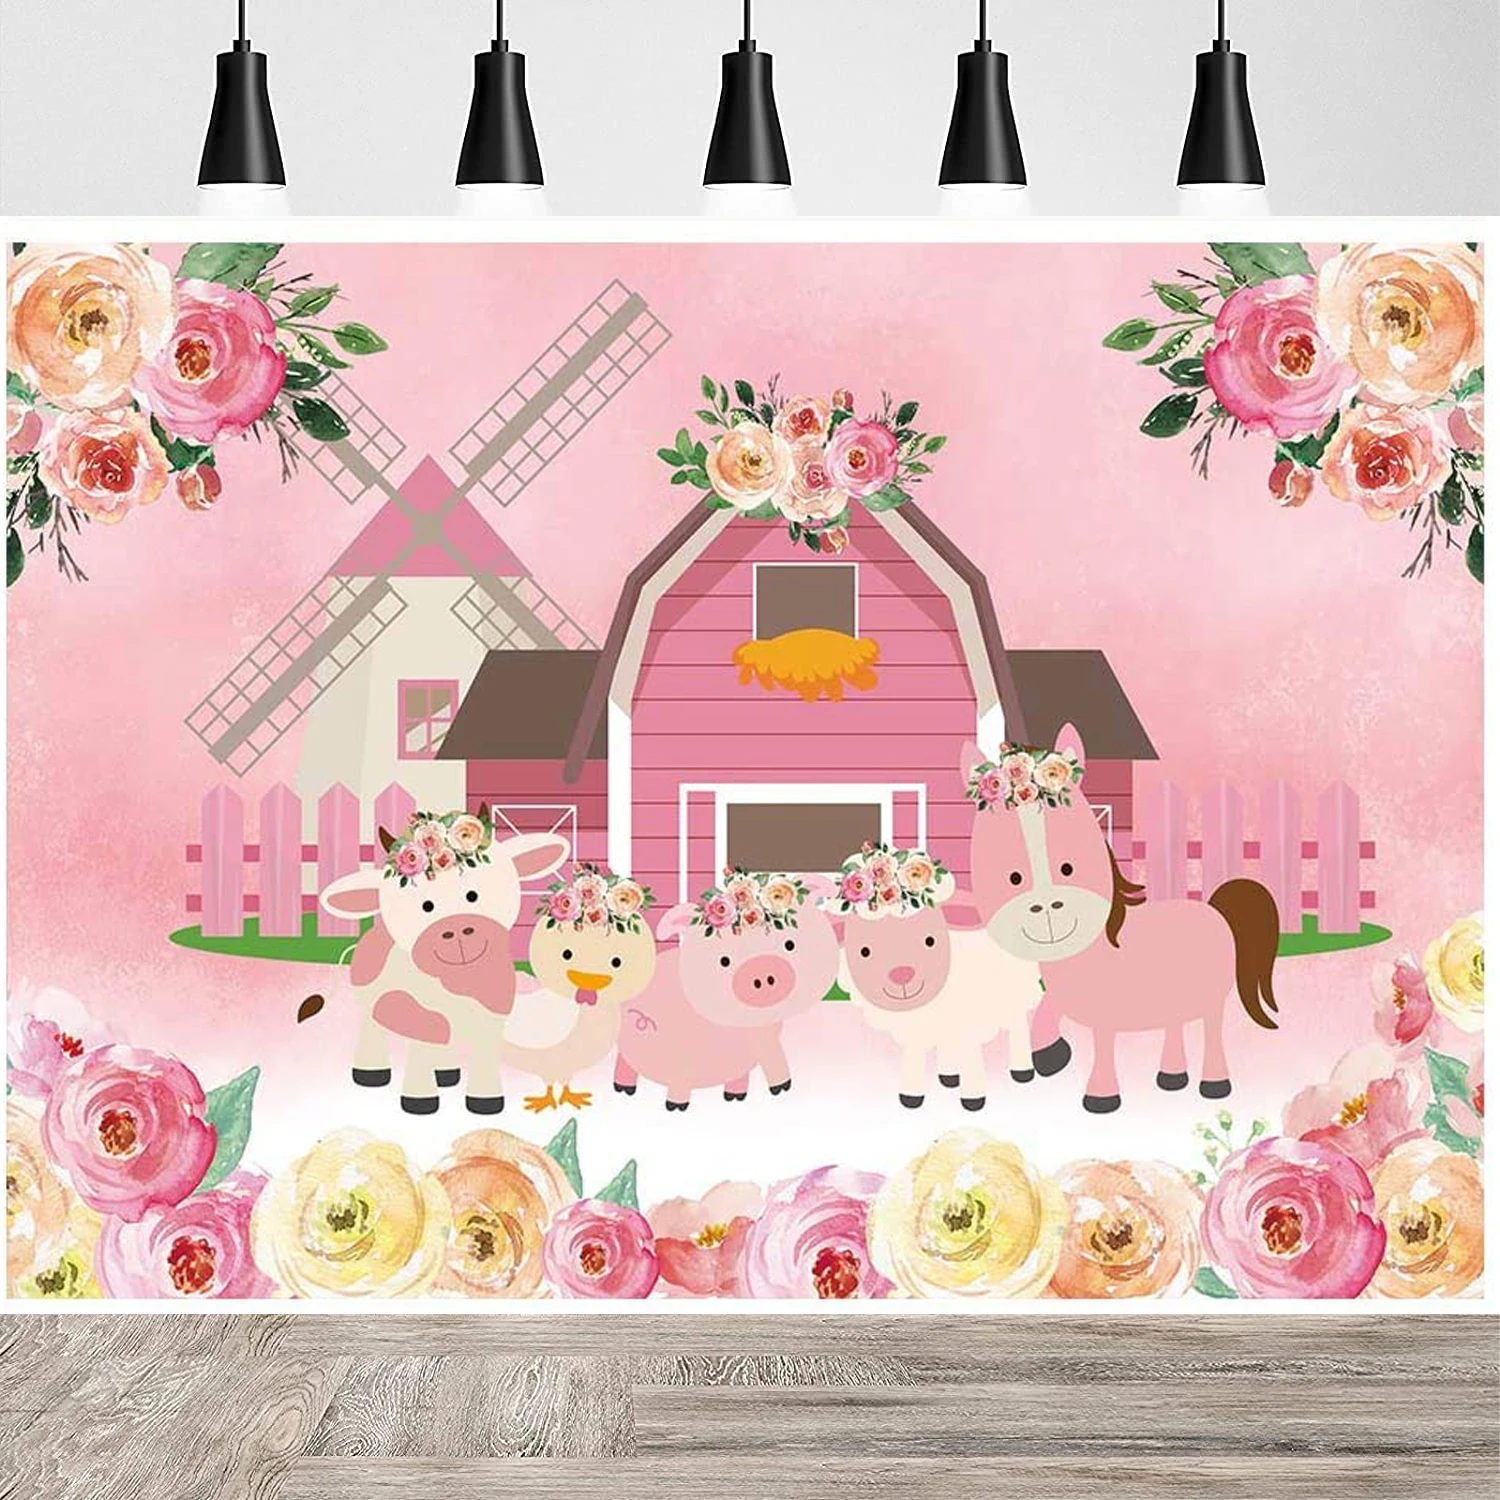 

Cartoon Farm Animal Party Backdrop Pink Barn Floral Girl Baby Shower Birthday Photography Background Flower Rustic Scenic Banner